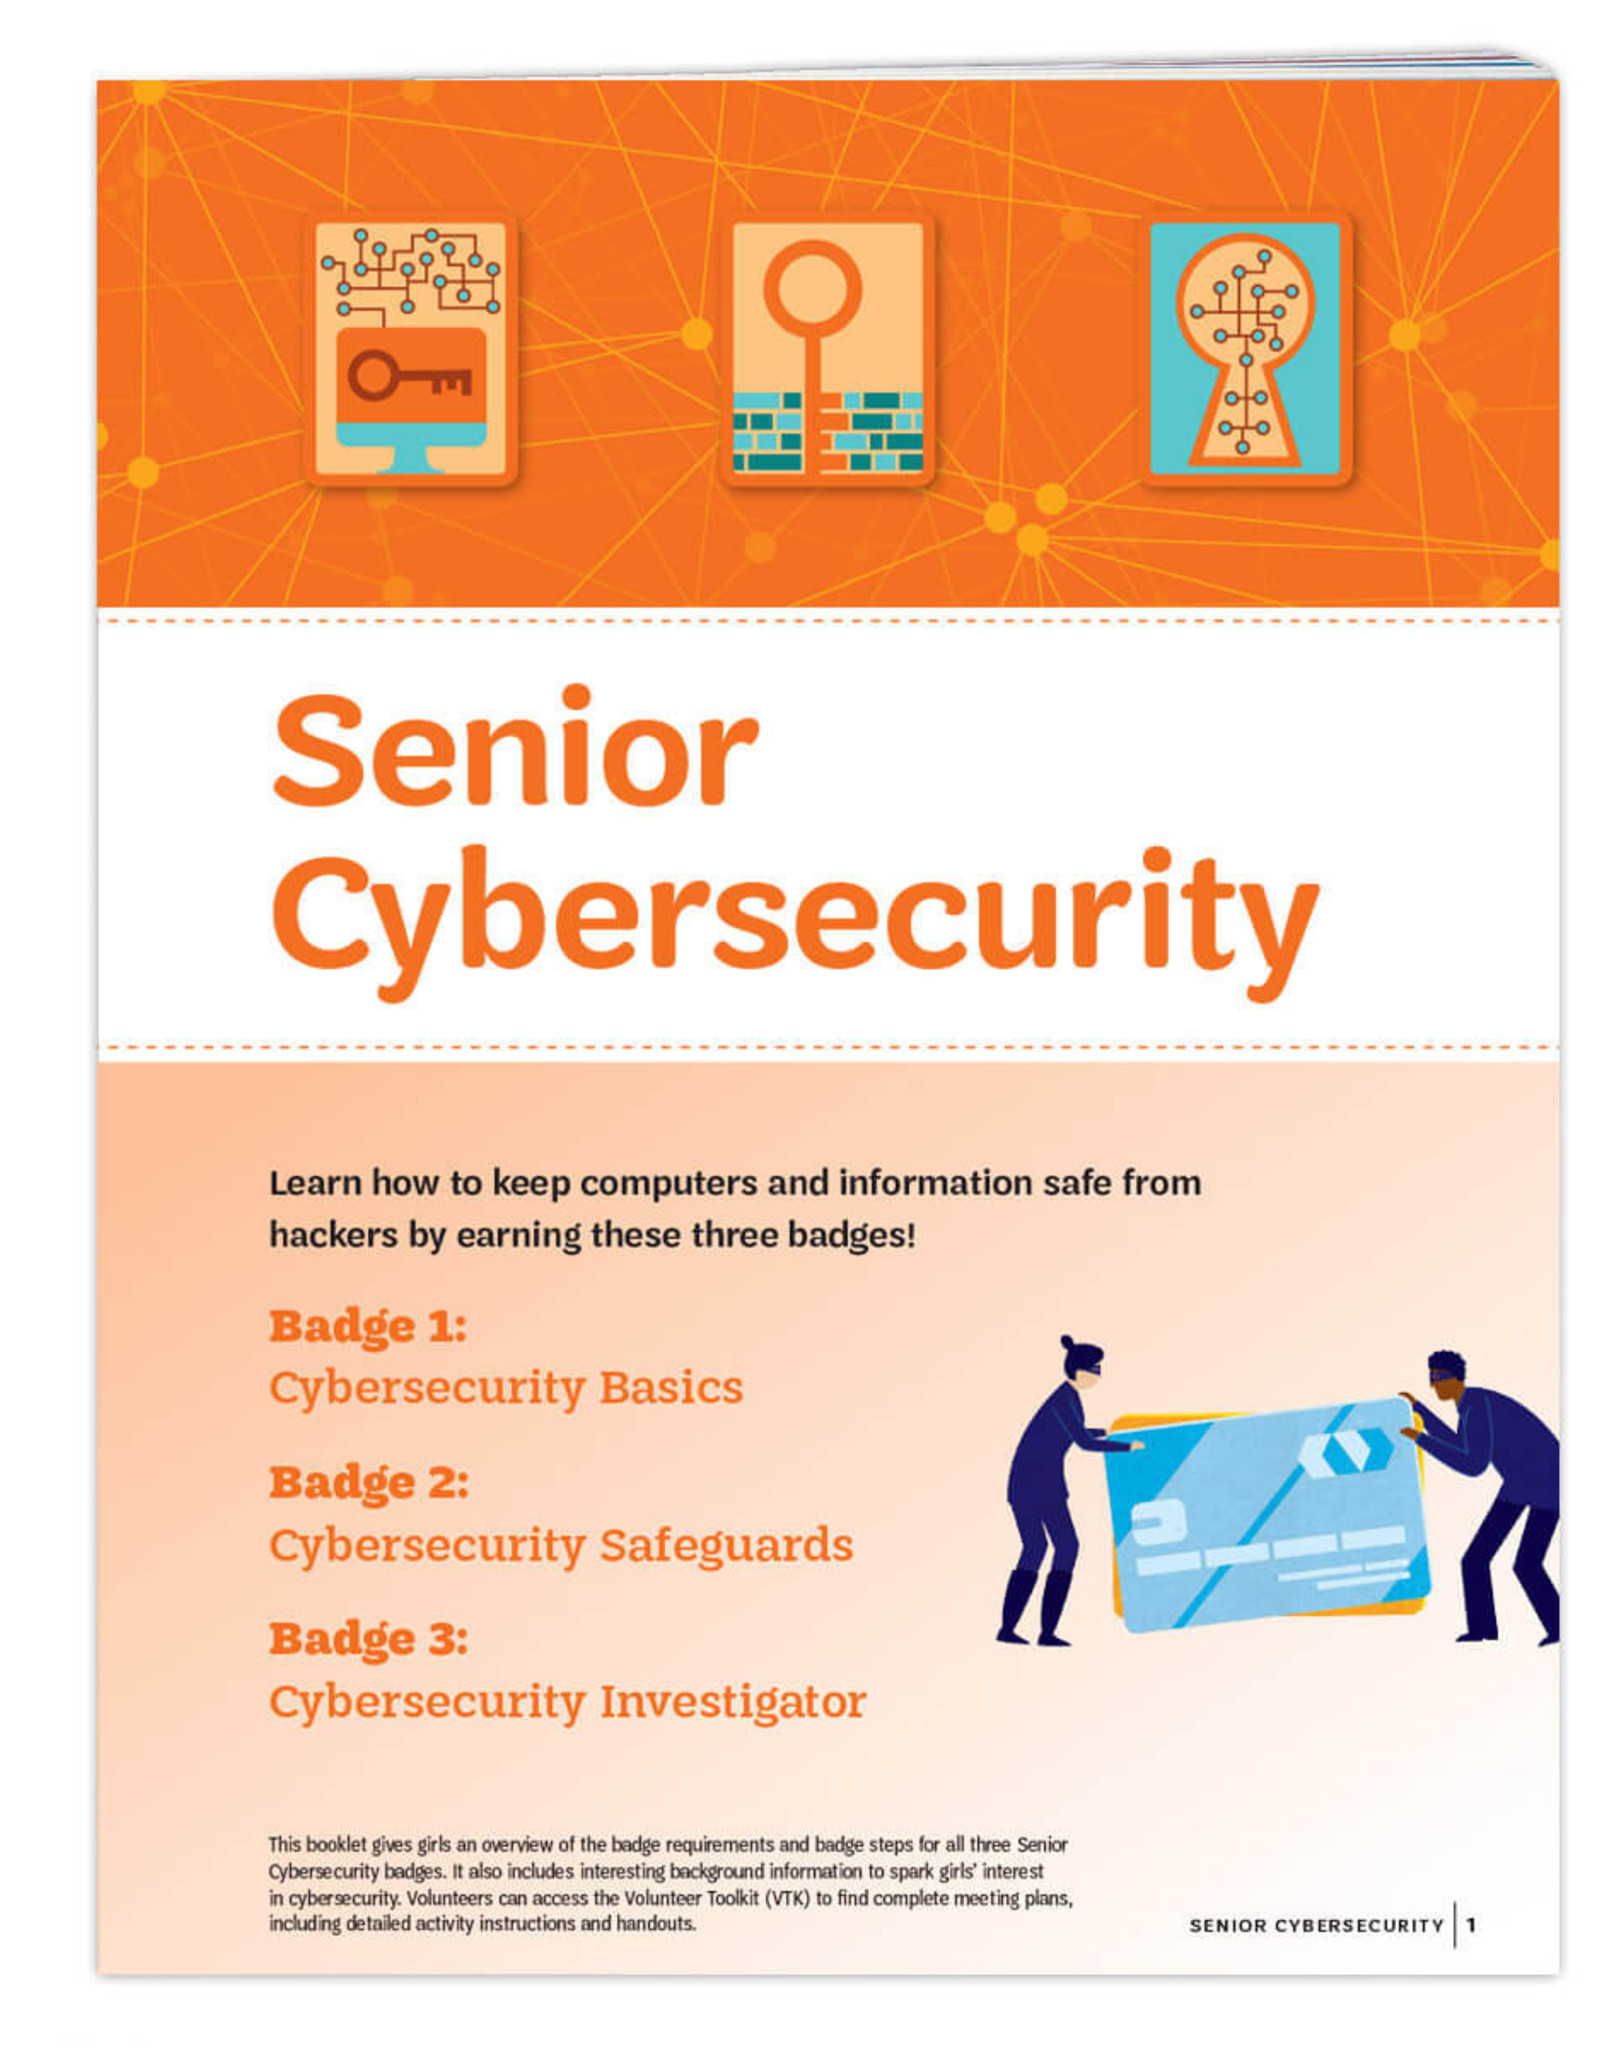 GIRL SCOUTS OF THE USA Senior Cybersecurity Requirements Pamphlet